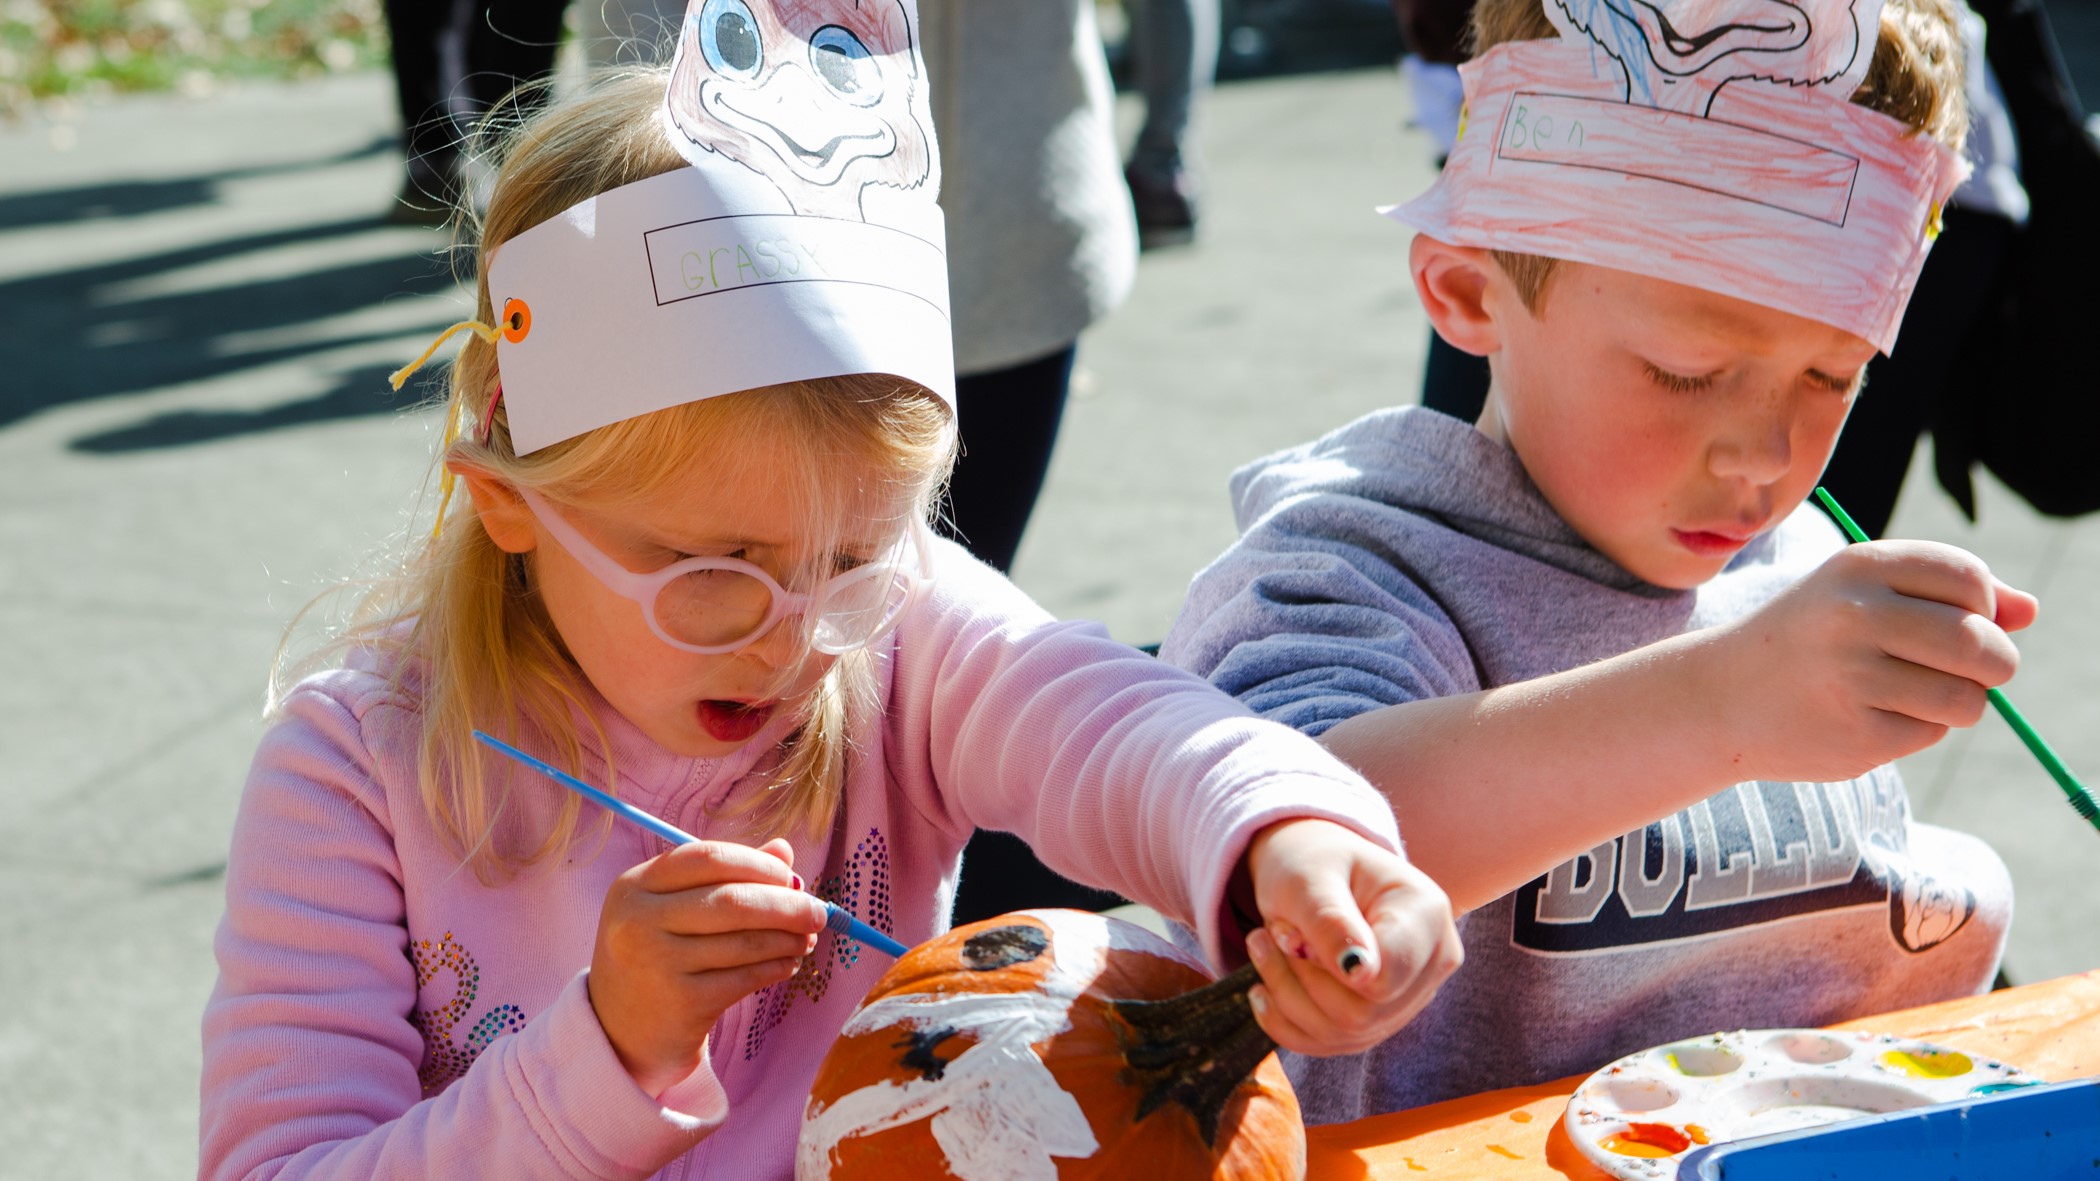 Locally Made: Indy’s Fall Festival brings creative family fun to Indianapolis Arts Center this weekend